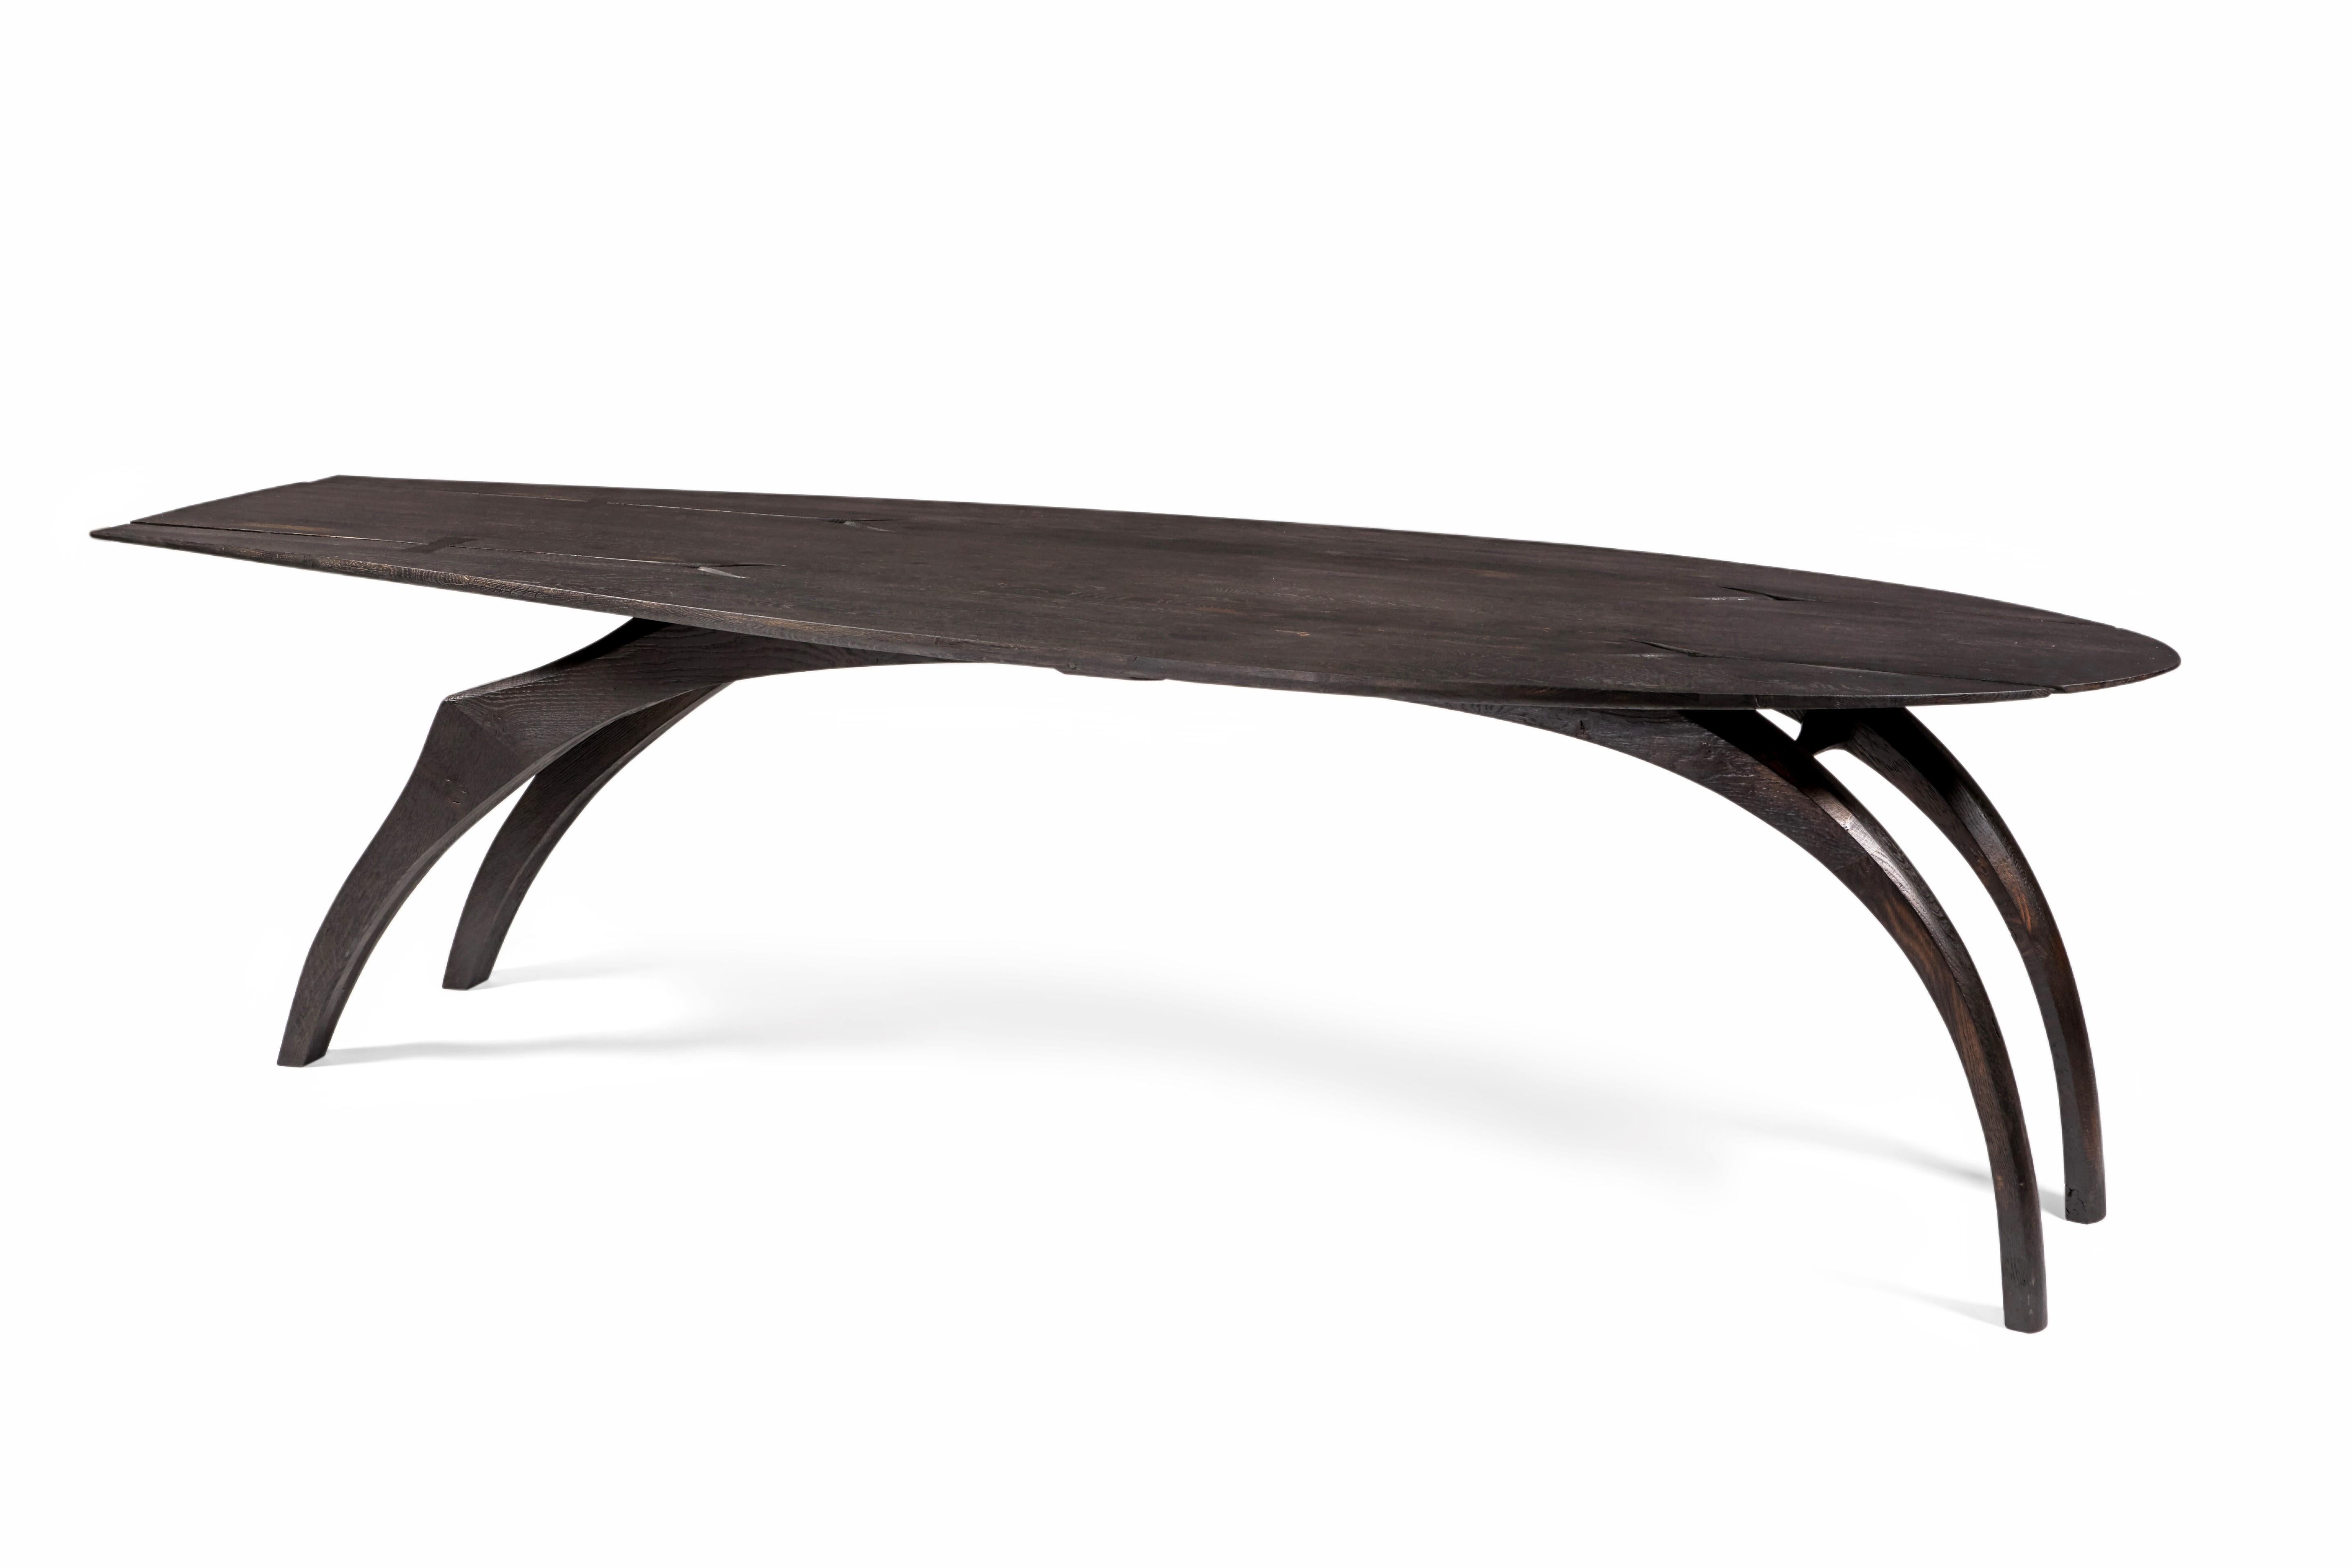 Ebonized 'Leap' Dining table, ebonized and scorched oak. One of a kind. Jonathan Field. 